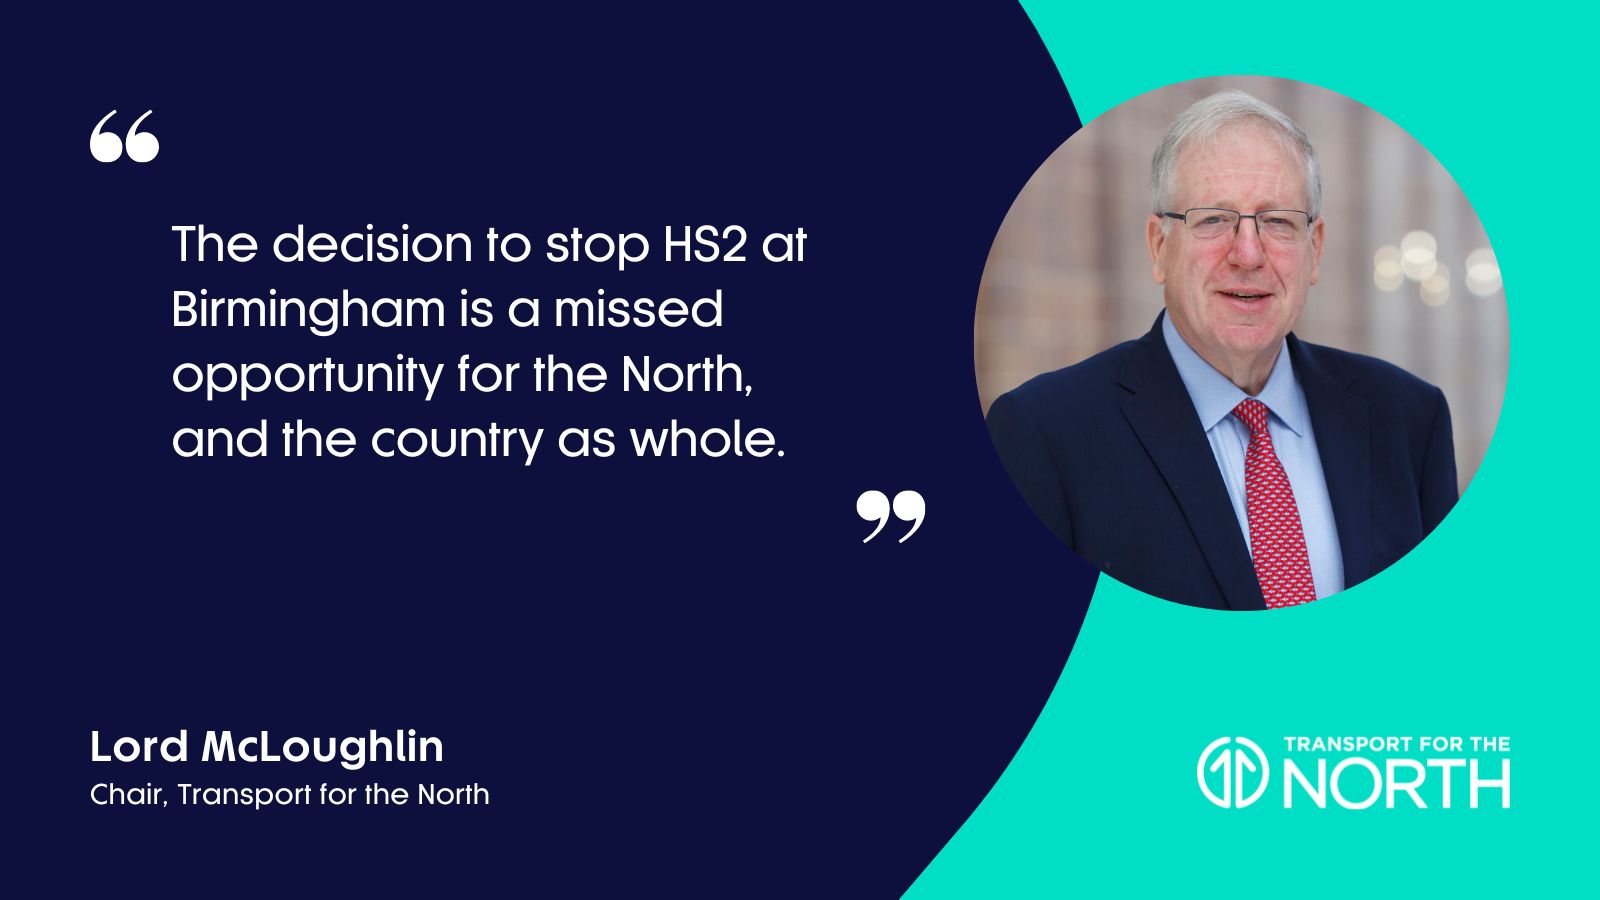 Lord McLoughlin comments on decision to stop HS2 at Birmingham